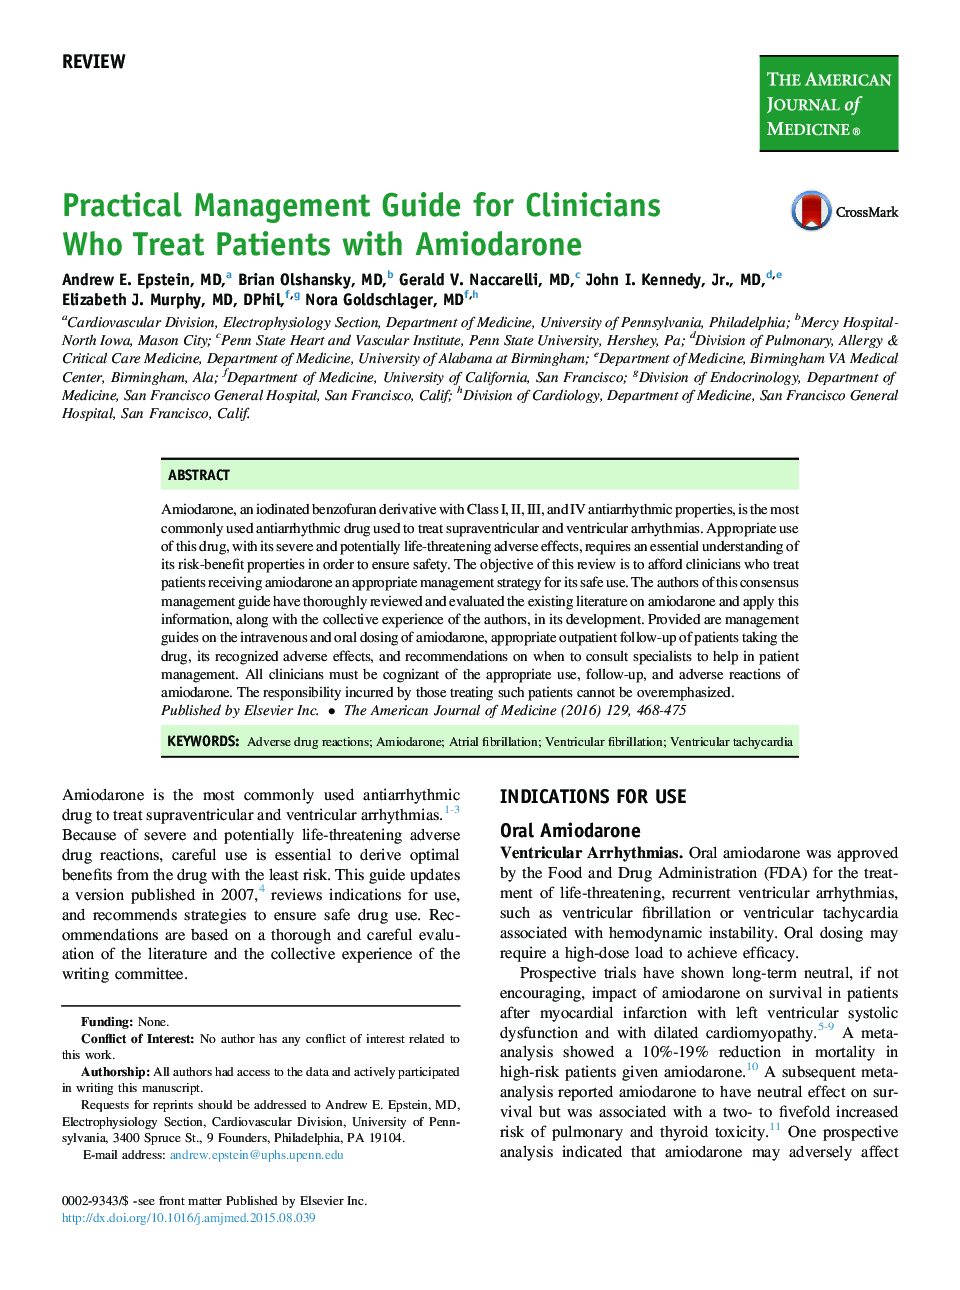 Practical Management Guide for Clinicians Who Treat Patients with Amiodarone 